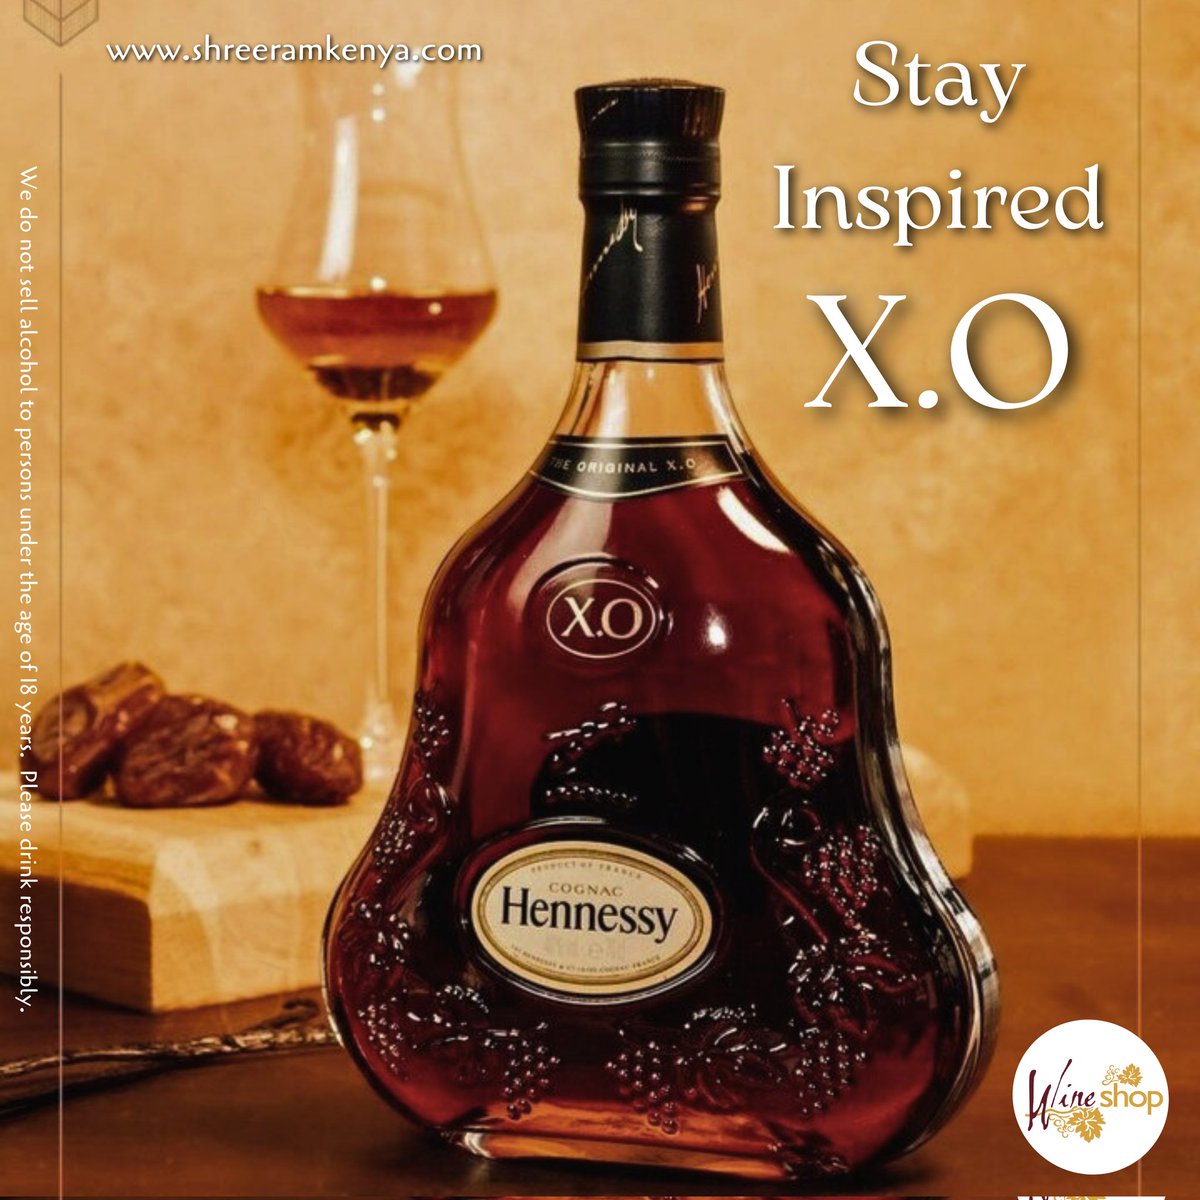 Elevate with a truly unique Cognac 🥃 and #stayinspired with the #hennessyxo available now @wineshopkisumu 📍 @the_westend_kisumu  ( next to Java House)

X.O ~ Aged for a minimum of 10 years, resulting in a smooth and luxurious drinking experience.